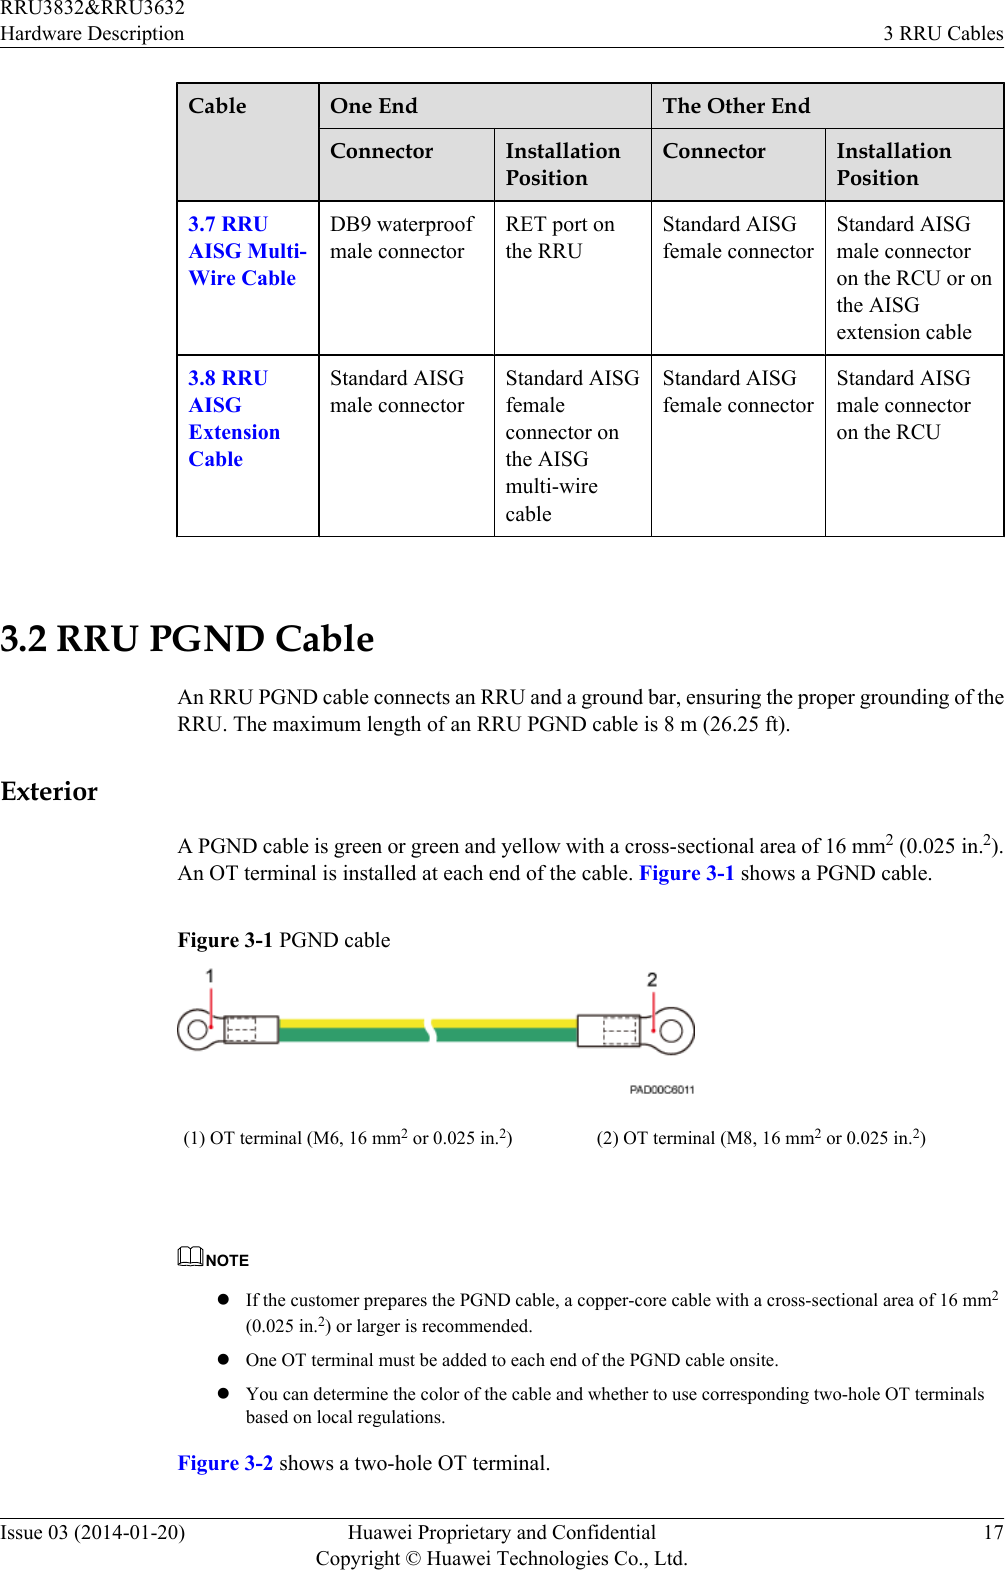 Cable One End The Other EndConnector InstallationPositionConnector InstallationPosition3.7 RRUAISG Multi-Wire CableDB9 waterproofmale connectorRET port onthe RRUStandard AISGfemale connectorStandard AISGmale connectoron the RCU or onthe AISGextension cable3.8 RRUAISGExtensionCableStandard AISGmale connectorStandard AISGfemaleconnector onthe AISGmulti-wirecableStandard AISGfemale connectorStandard AISGmale connectoron the RCU 3.2 RRU PGND CableAn RRU PGND cable connects an RRU and a ground bar, ensuring the proper grounding of theRRU. The maximum length of an RRU PGND cable is 8 m (26.25 ft).ExteriorA PGND cable is green or green and yellow with a cross-sectional area of 16 mm2 (0.025 in.2).An OT terminal is installed at each end of the cable. Figure 3-1 shows a PGND cable.Figure 3-1 PGND cable(1) OT terminal (M6, 16 mm2 or 0.025 in.2) (2) OT terminal (M8, 16 mm2 or 0.025 in.2) NOTElIf the customer prepares the PGND cable, a copper-core cable with a cross-sectional area of 16 mm2(0.025 in.2) or larger is recommended.lOne OT terminal must be added to each end of the PGND cable onsite.lYou can determine the color of the cable and whether to use corresponding two-hole OT terminalsbased on local regulations.Figure 3-2 shows a two-hole OT terminal.RRU3832&amp;RRU3632Hardware Description 3 RRU CablesIssue 03 (2014-01-20) Huawei Proprietary and ConfidentialCopyright © Huawei Technologies Co., Ltd.17